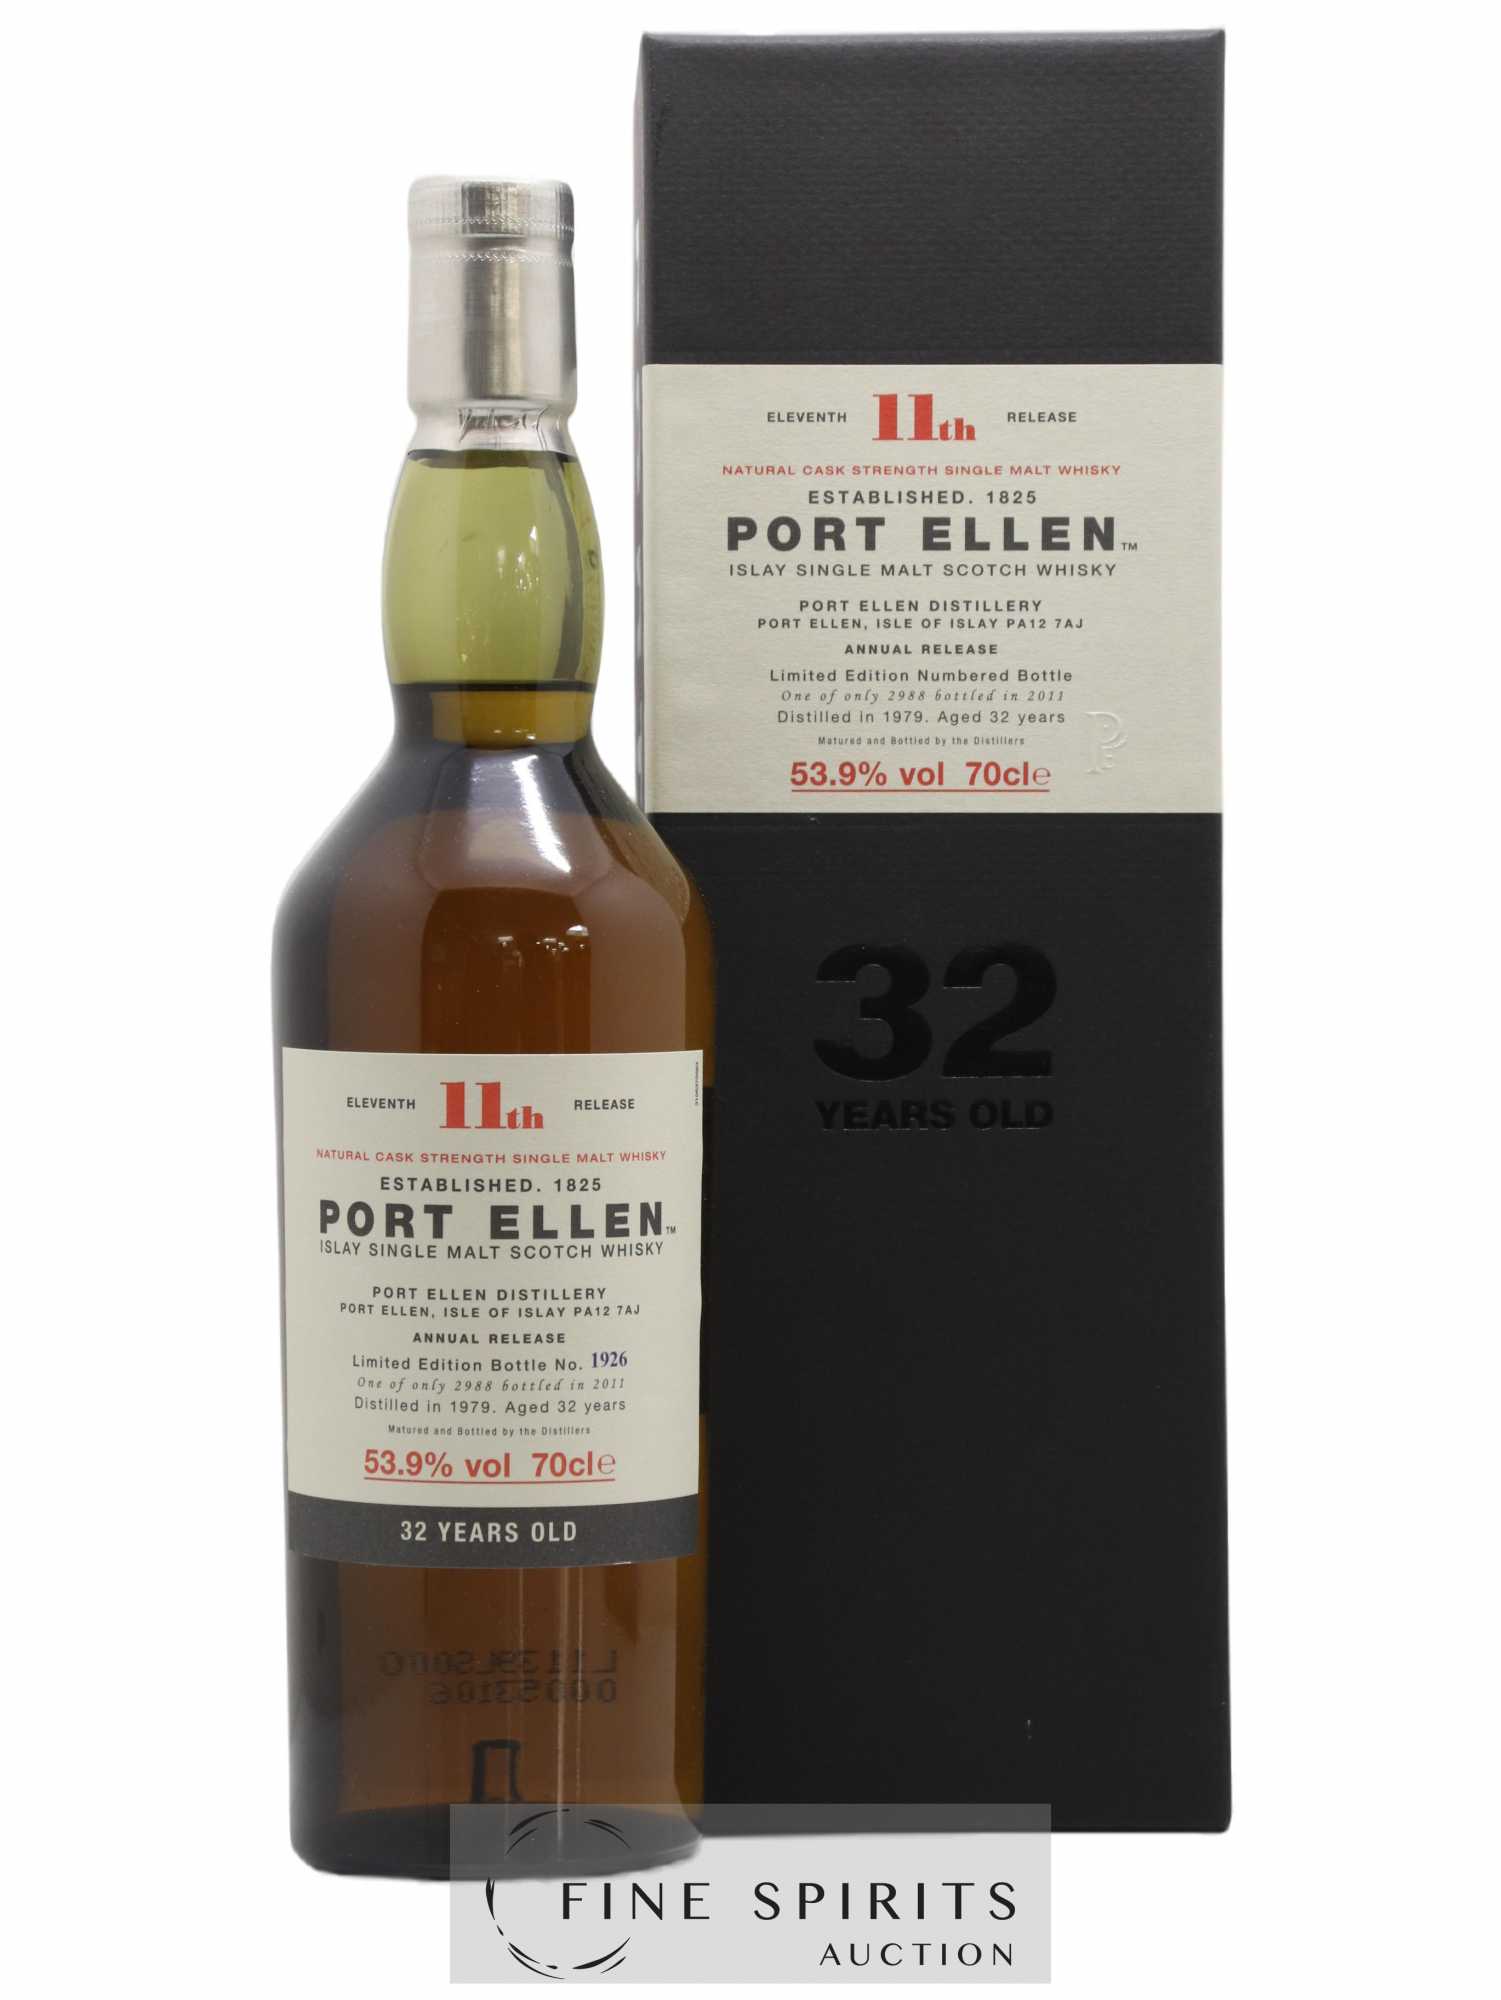 Port Ellen 32 years 1979 Of. 11th Release Natural Cask Strength - One of 2988 - bottled 2011 Limited Edition 